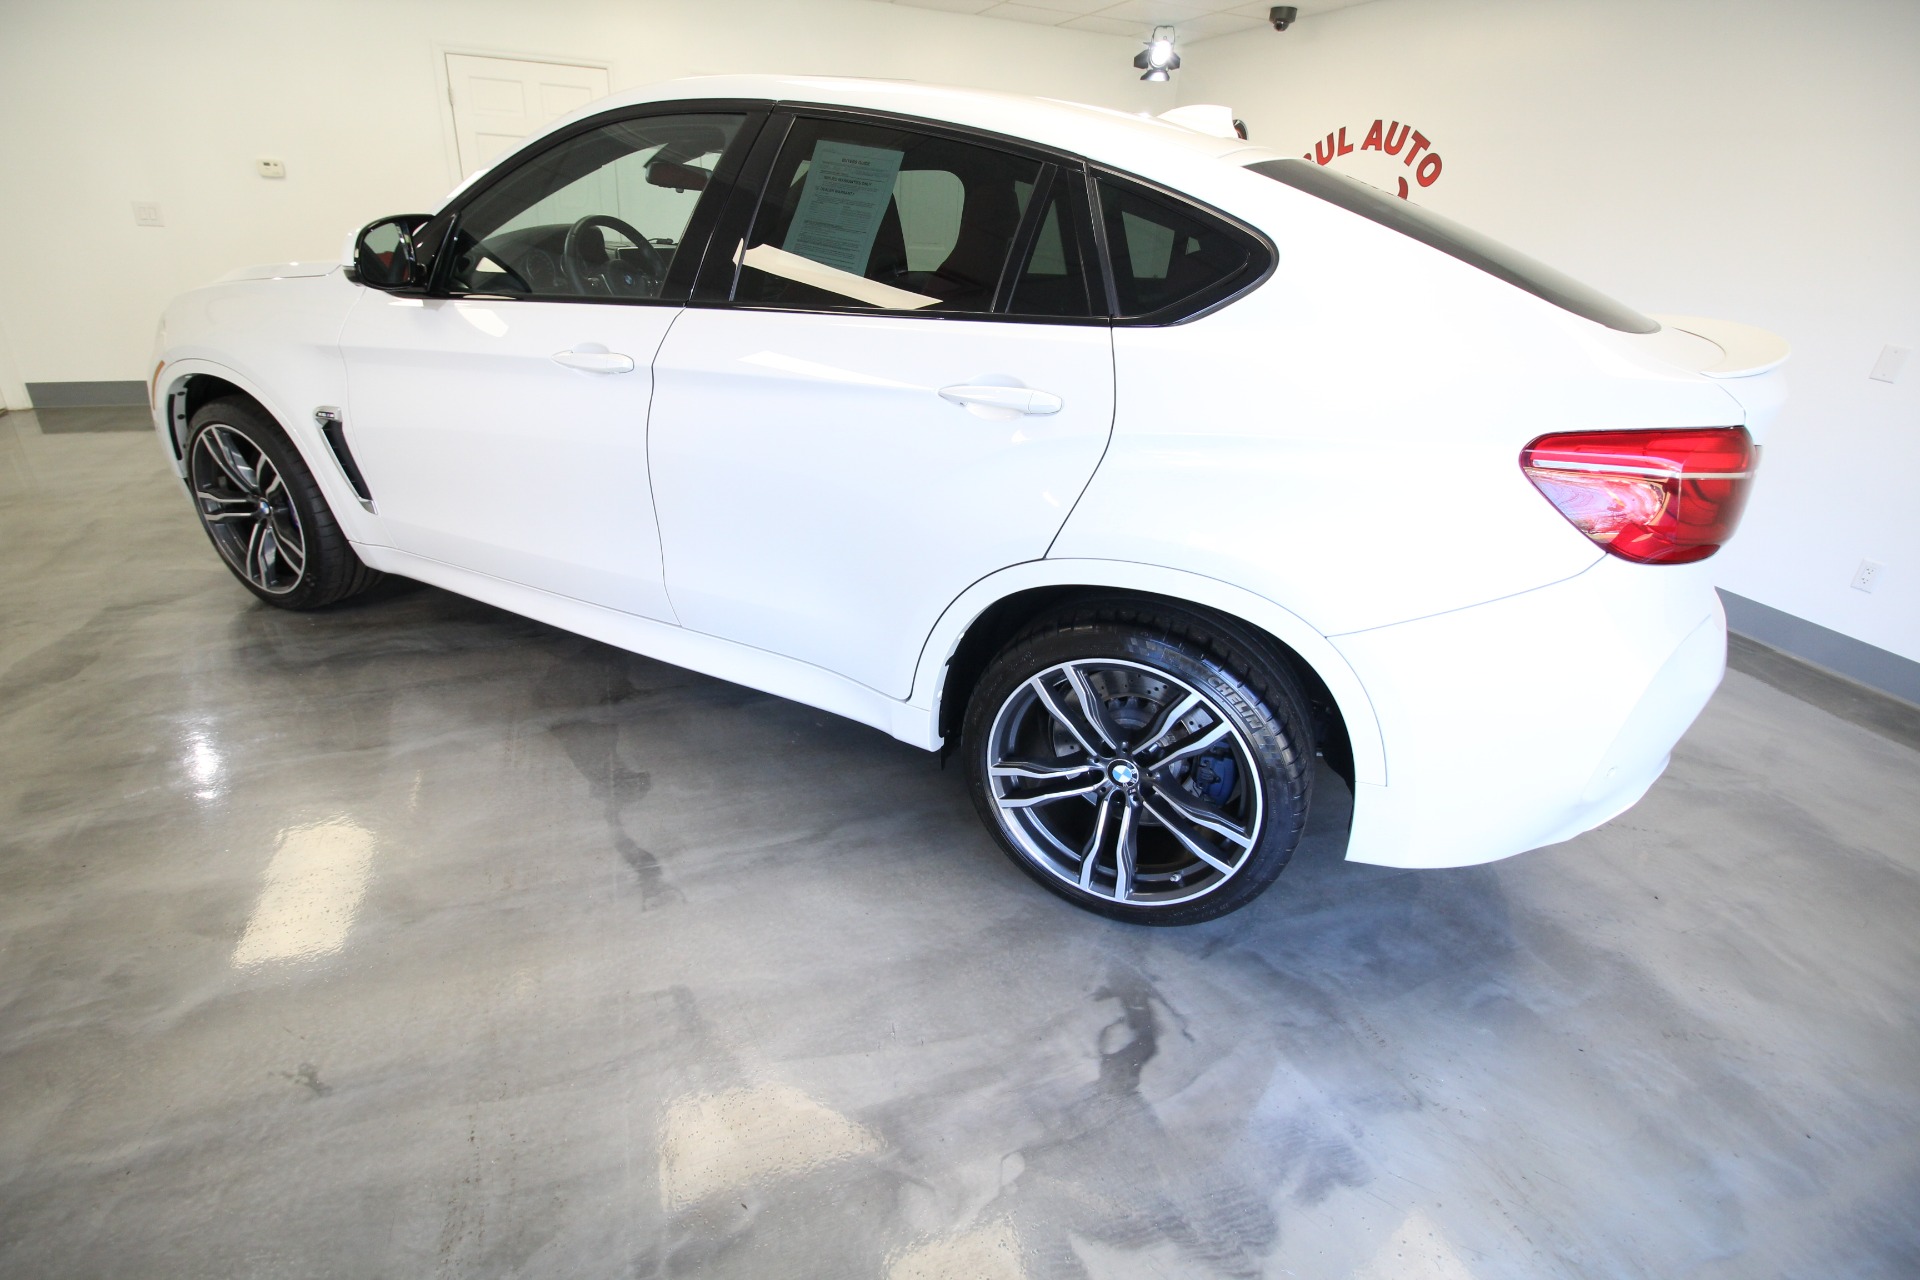 Used 2017 Alpine White BMW X6 M Beautiful White With Red Interior | Albany, NY